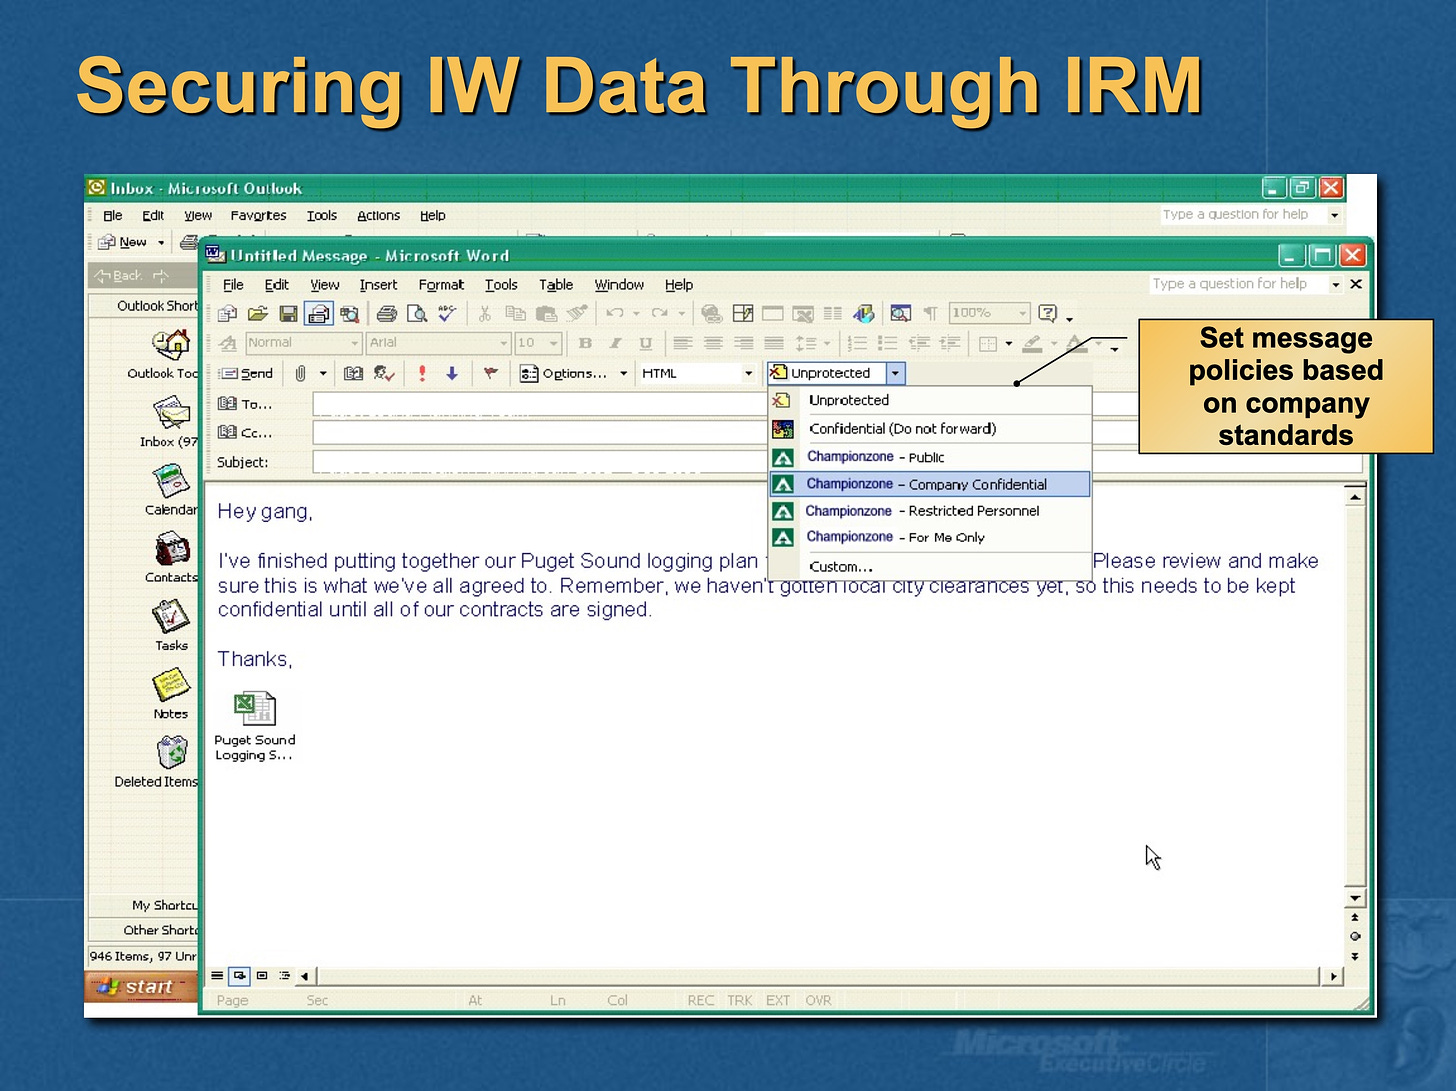 Slide title: Securing IW [Information Worker] Day Though IRM - features a screenshot of Outlook with a drop down menu on a new mail message showing categories of protection - confidential, public, company confidential, etc.